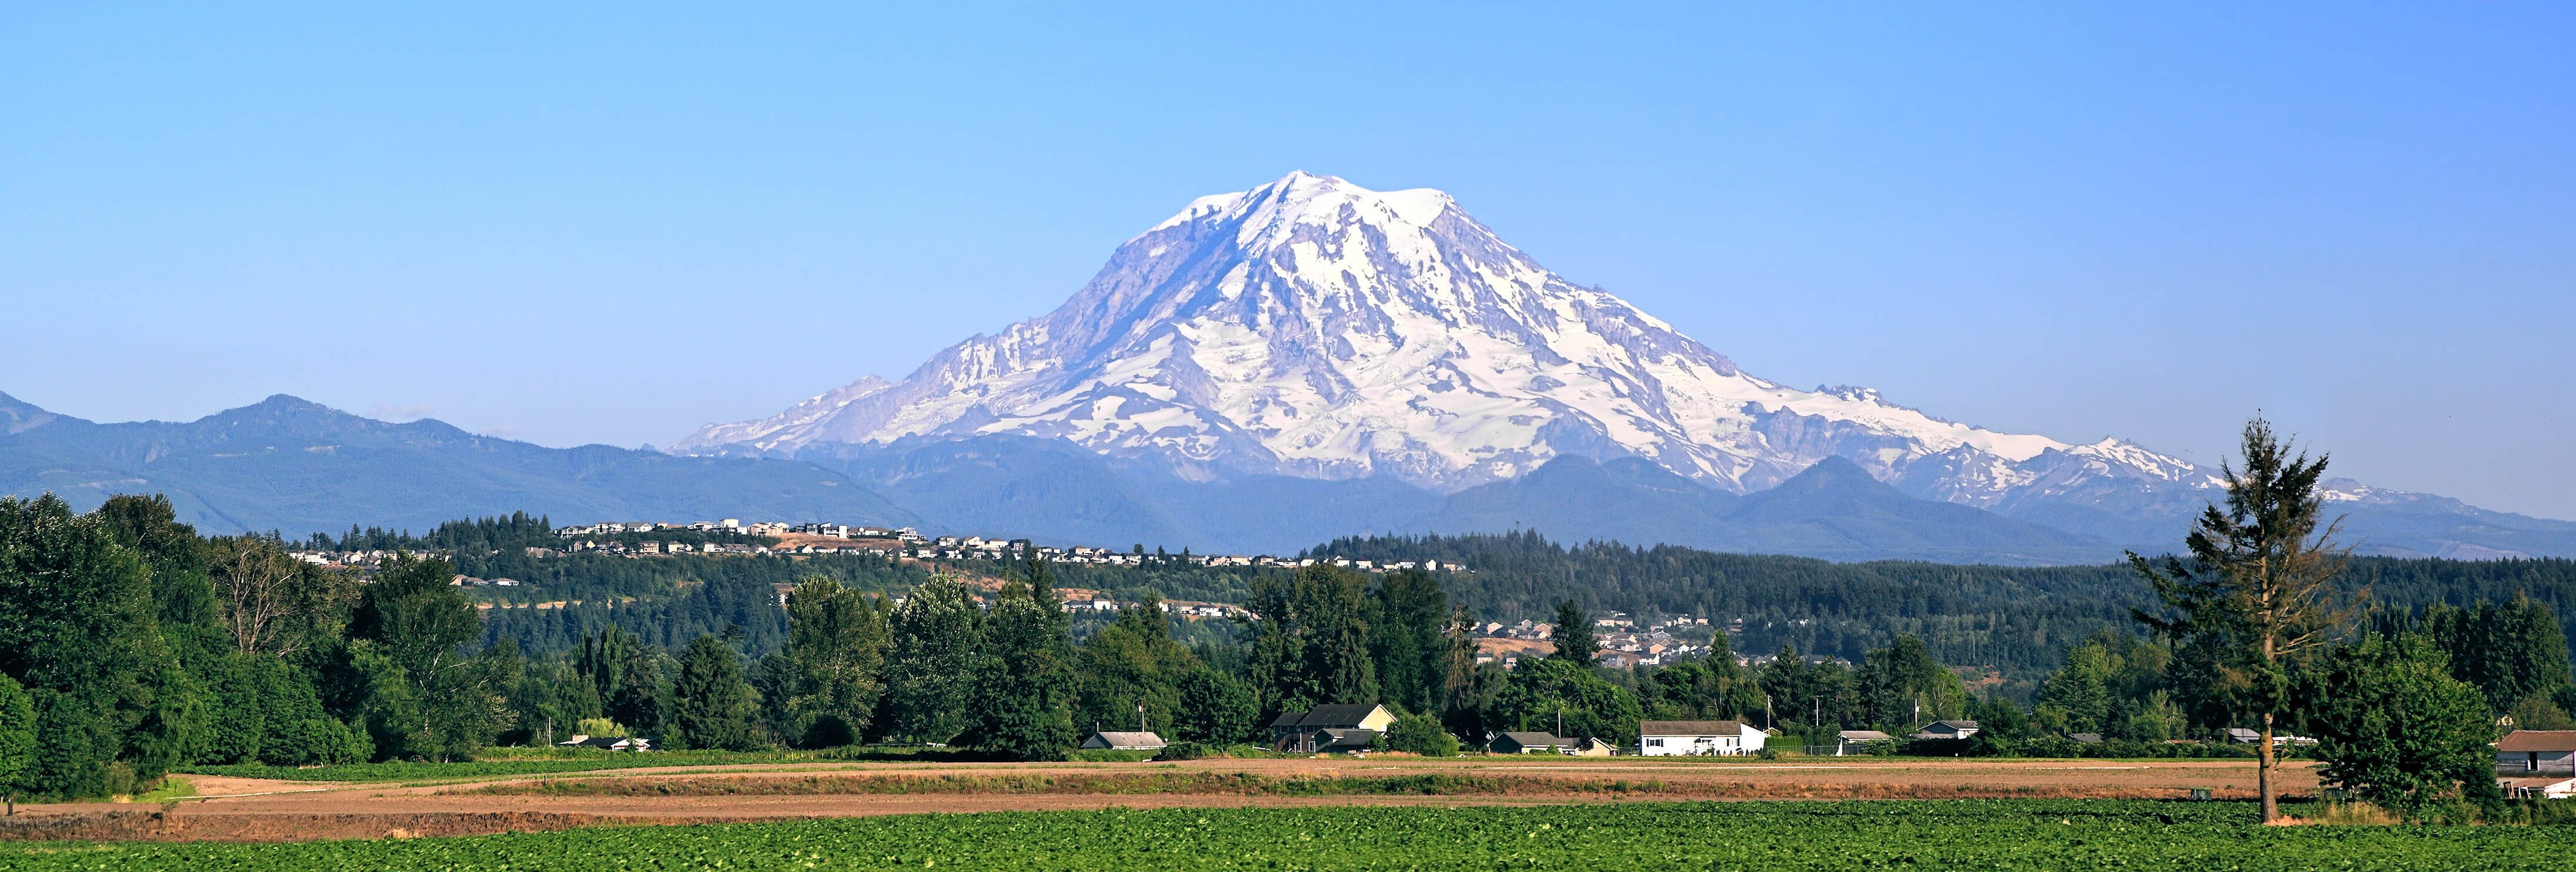 Image of mountains in Washington on our chiropractic ce page 